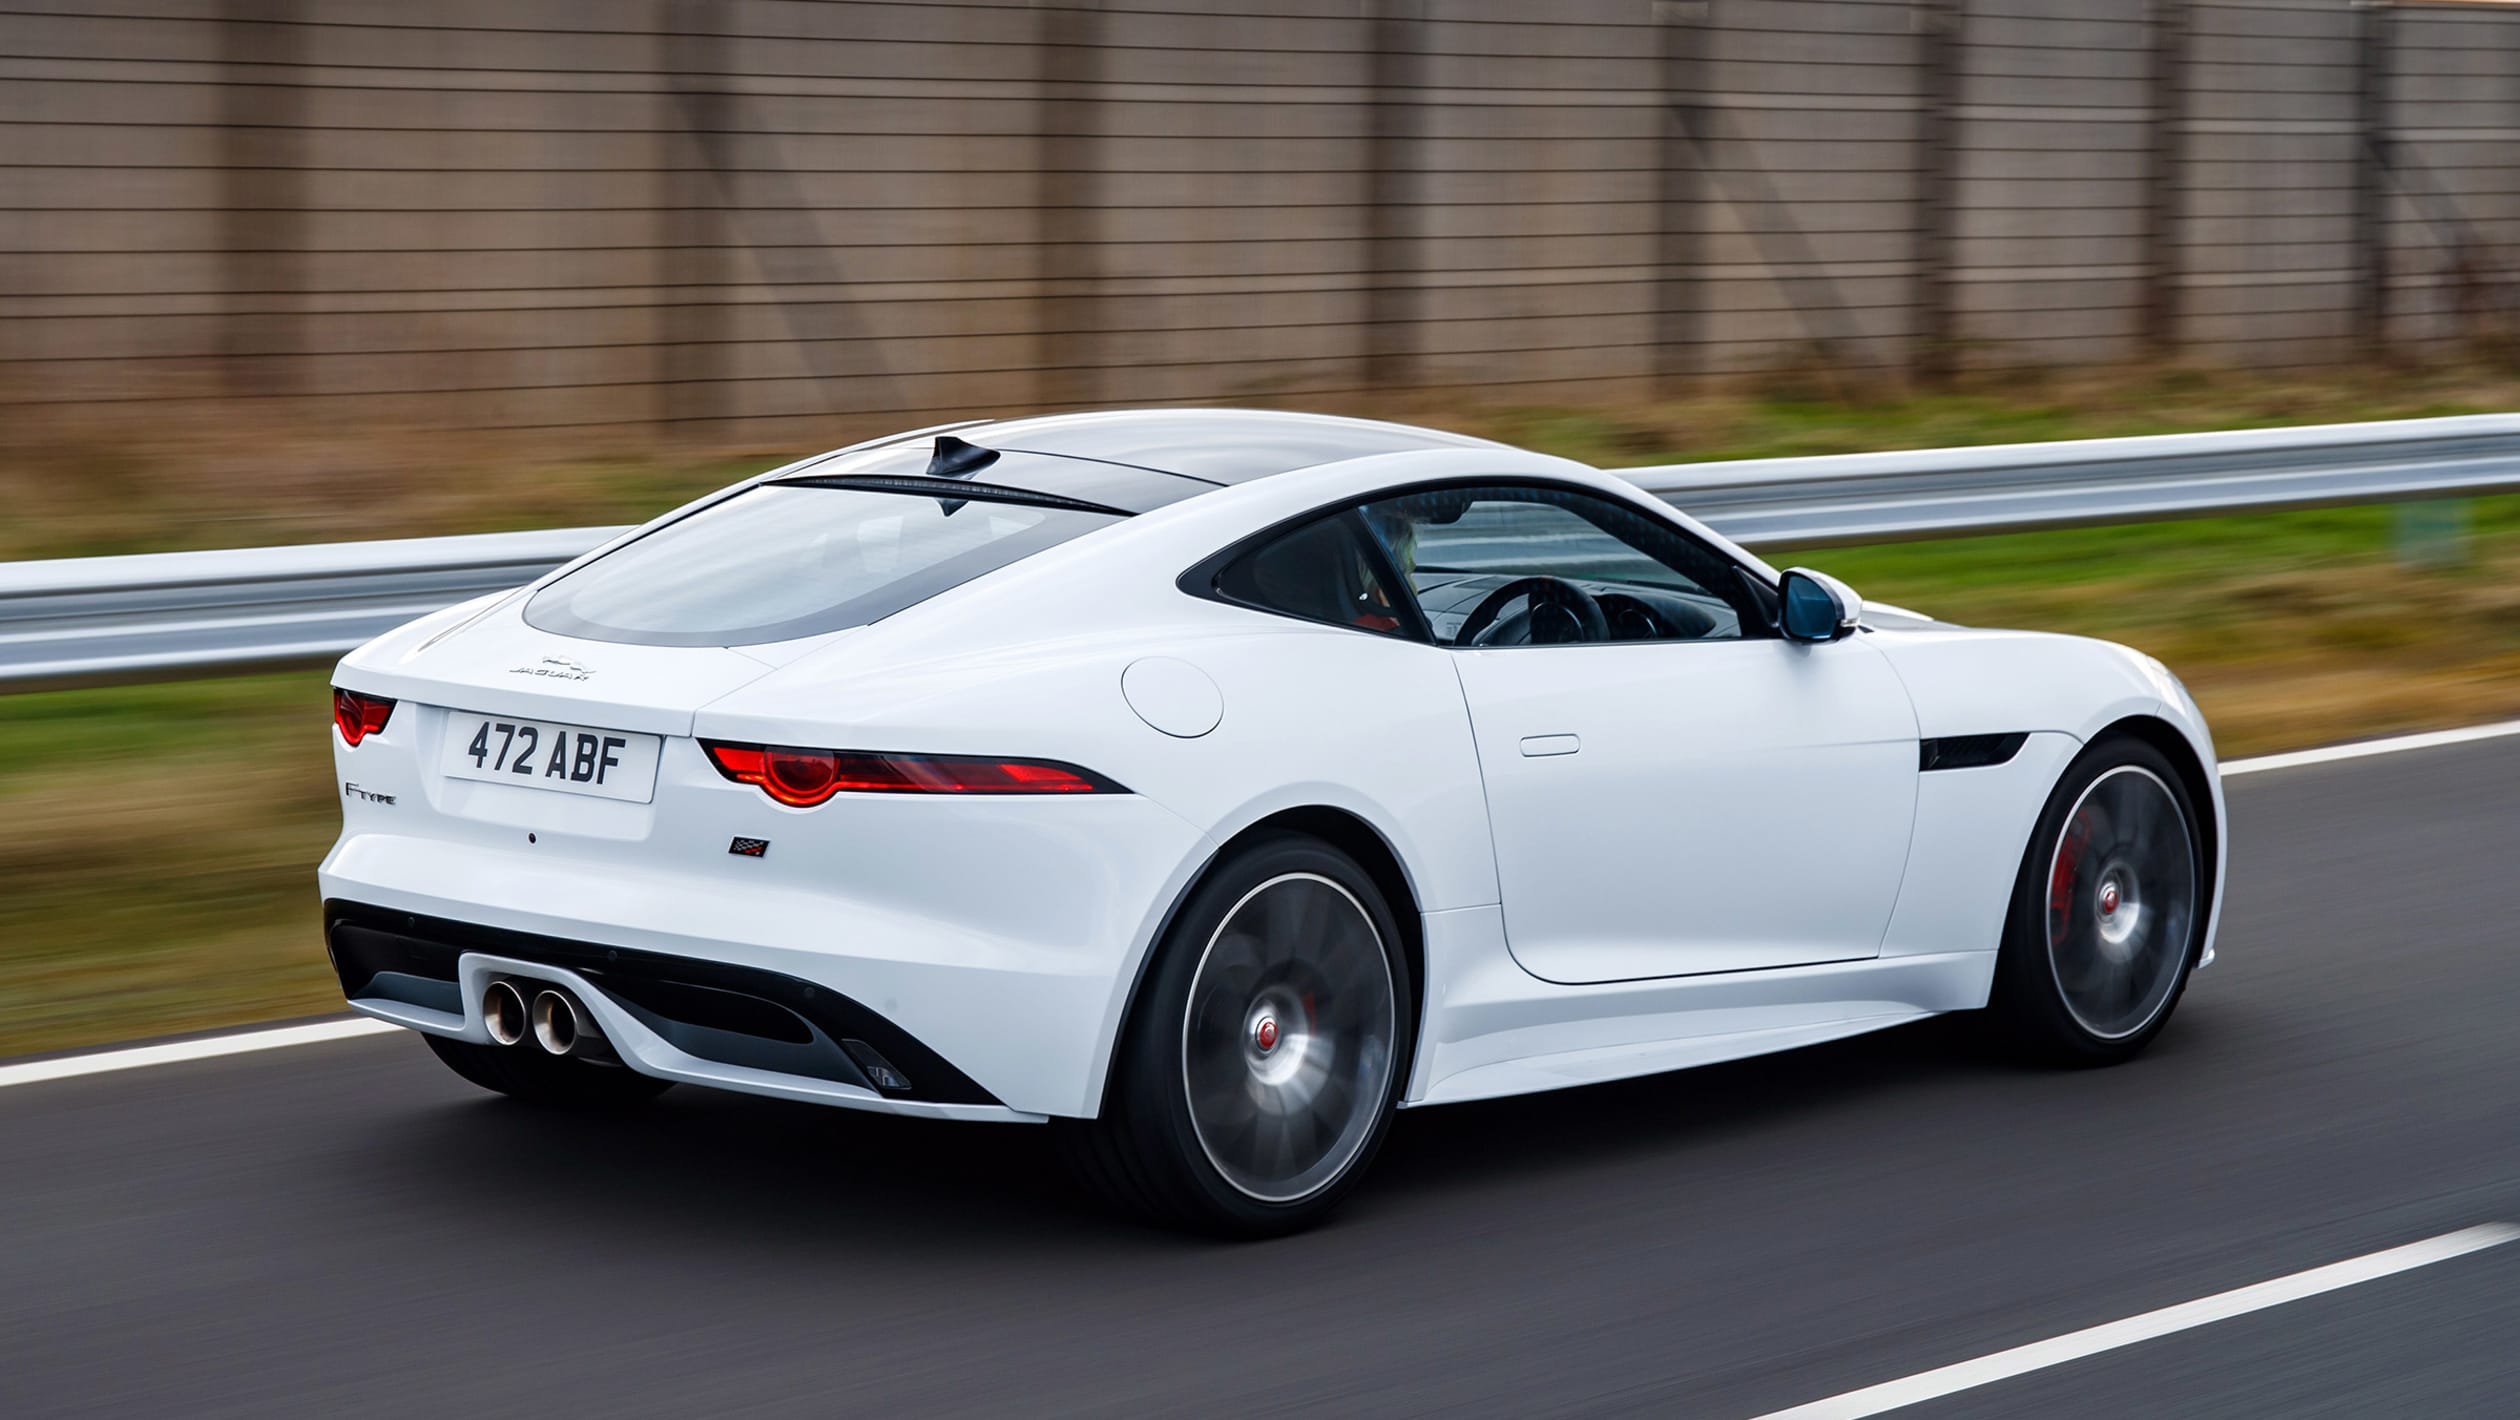 New Jaguar F-Type Chequered Flag 2019 review - pictures | Auto Express